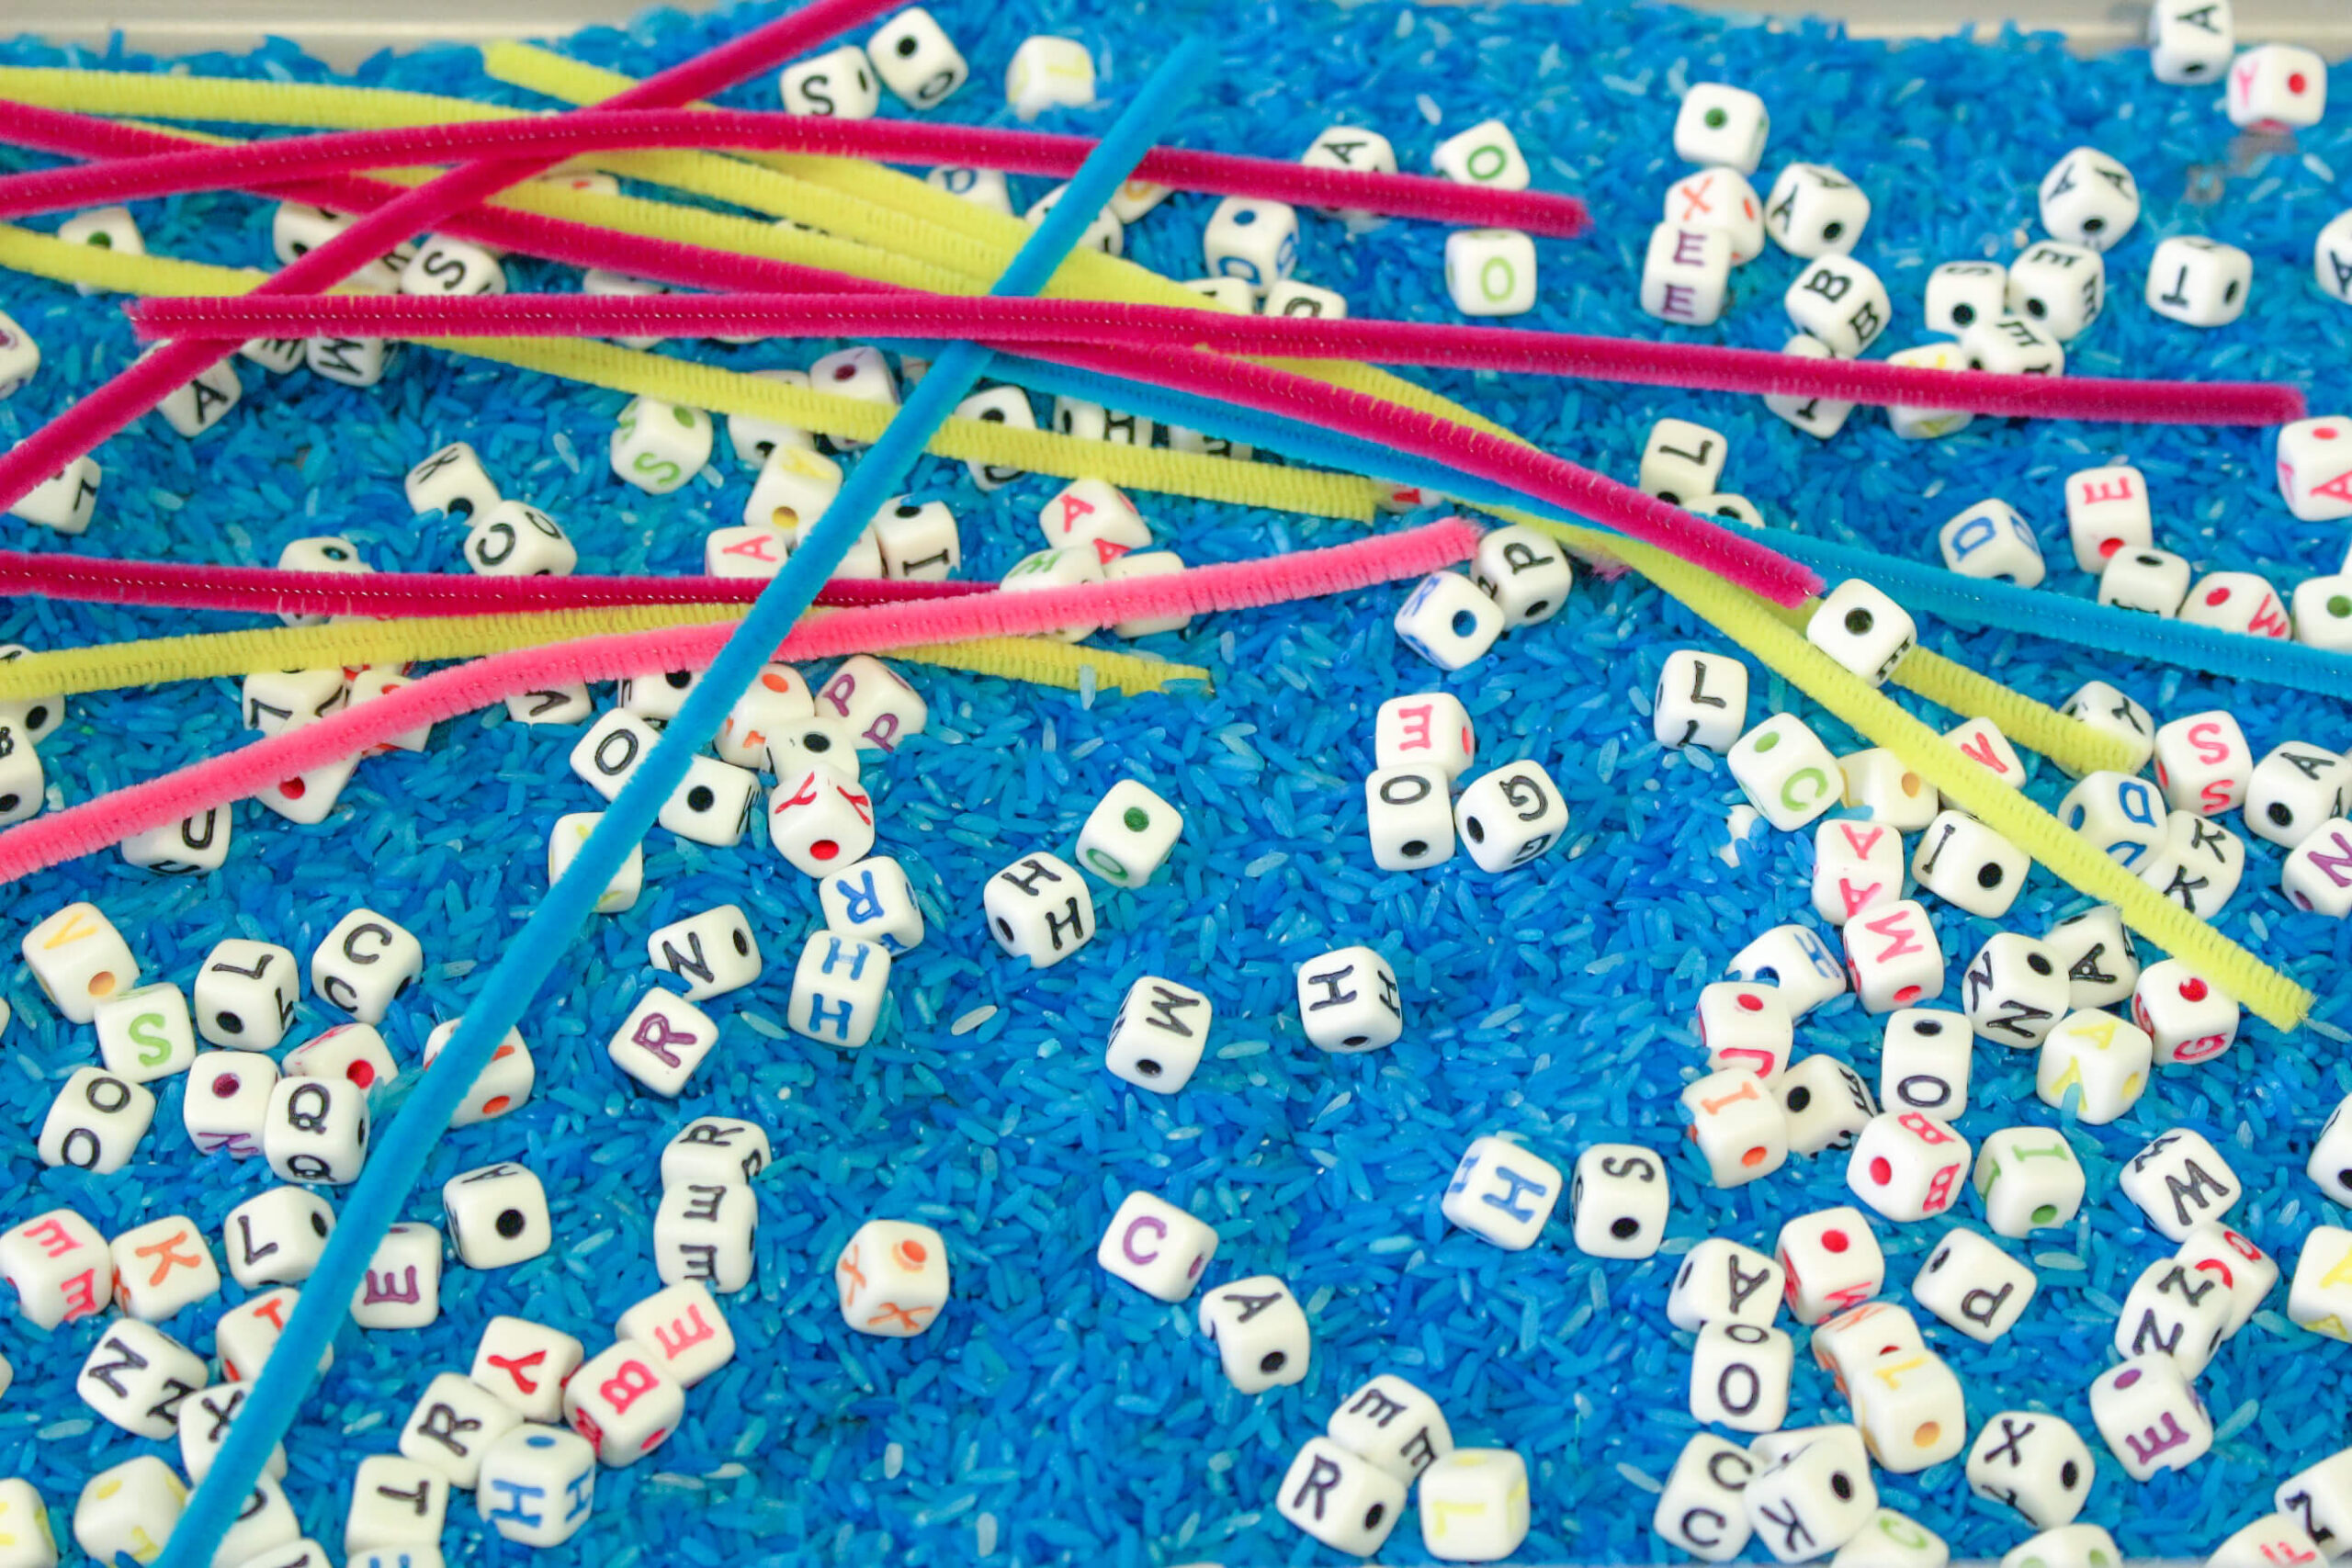 Alphabet beads and pipe cleaners sensory bin for making words